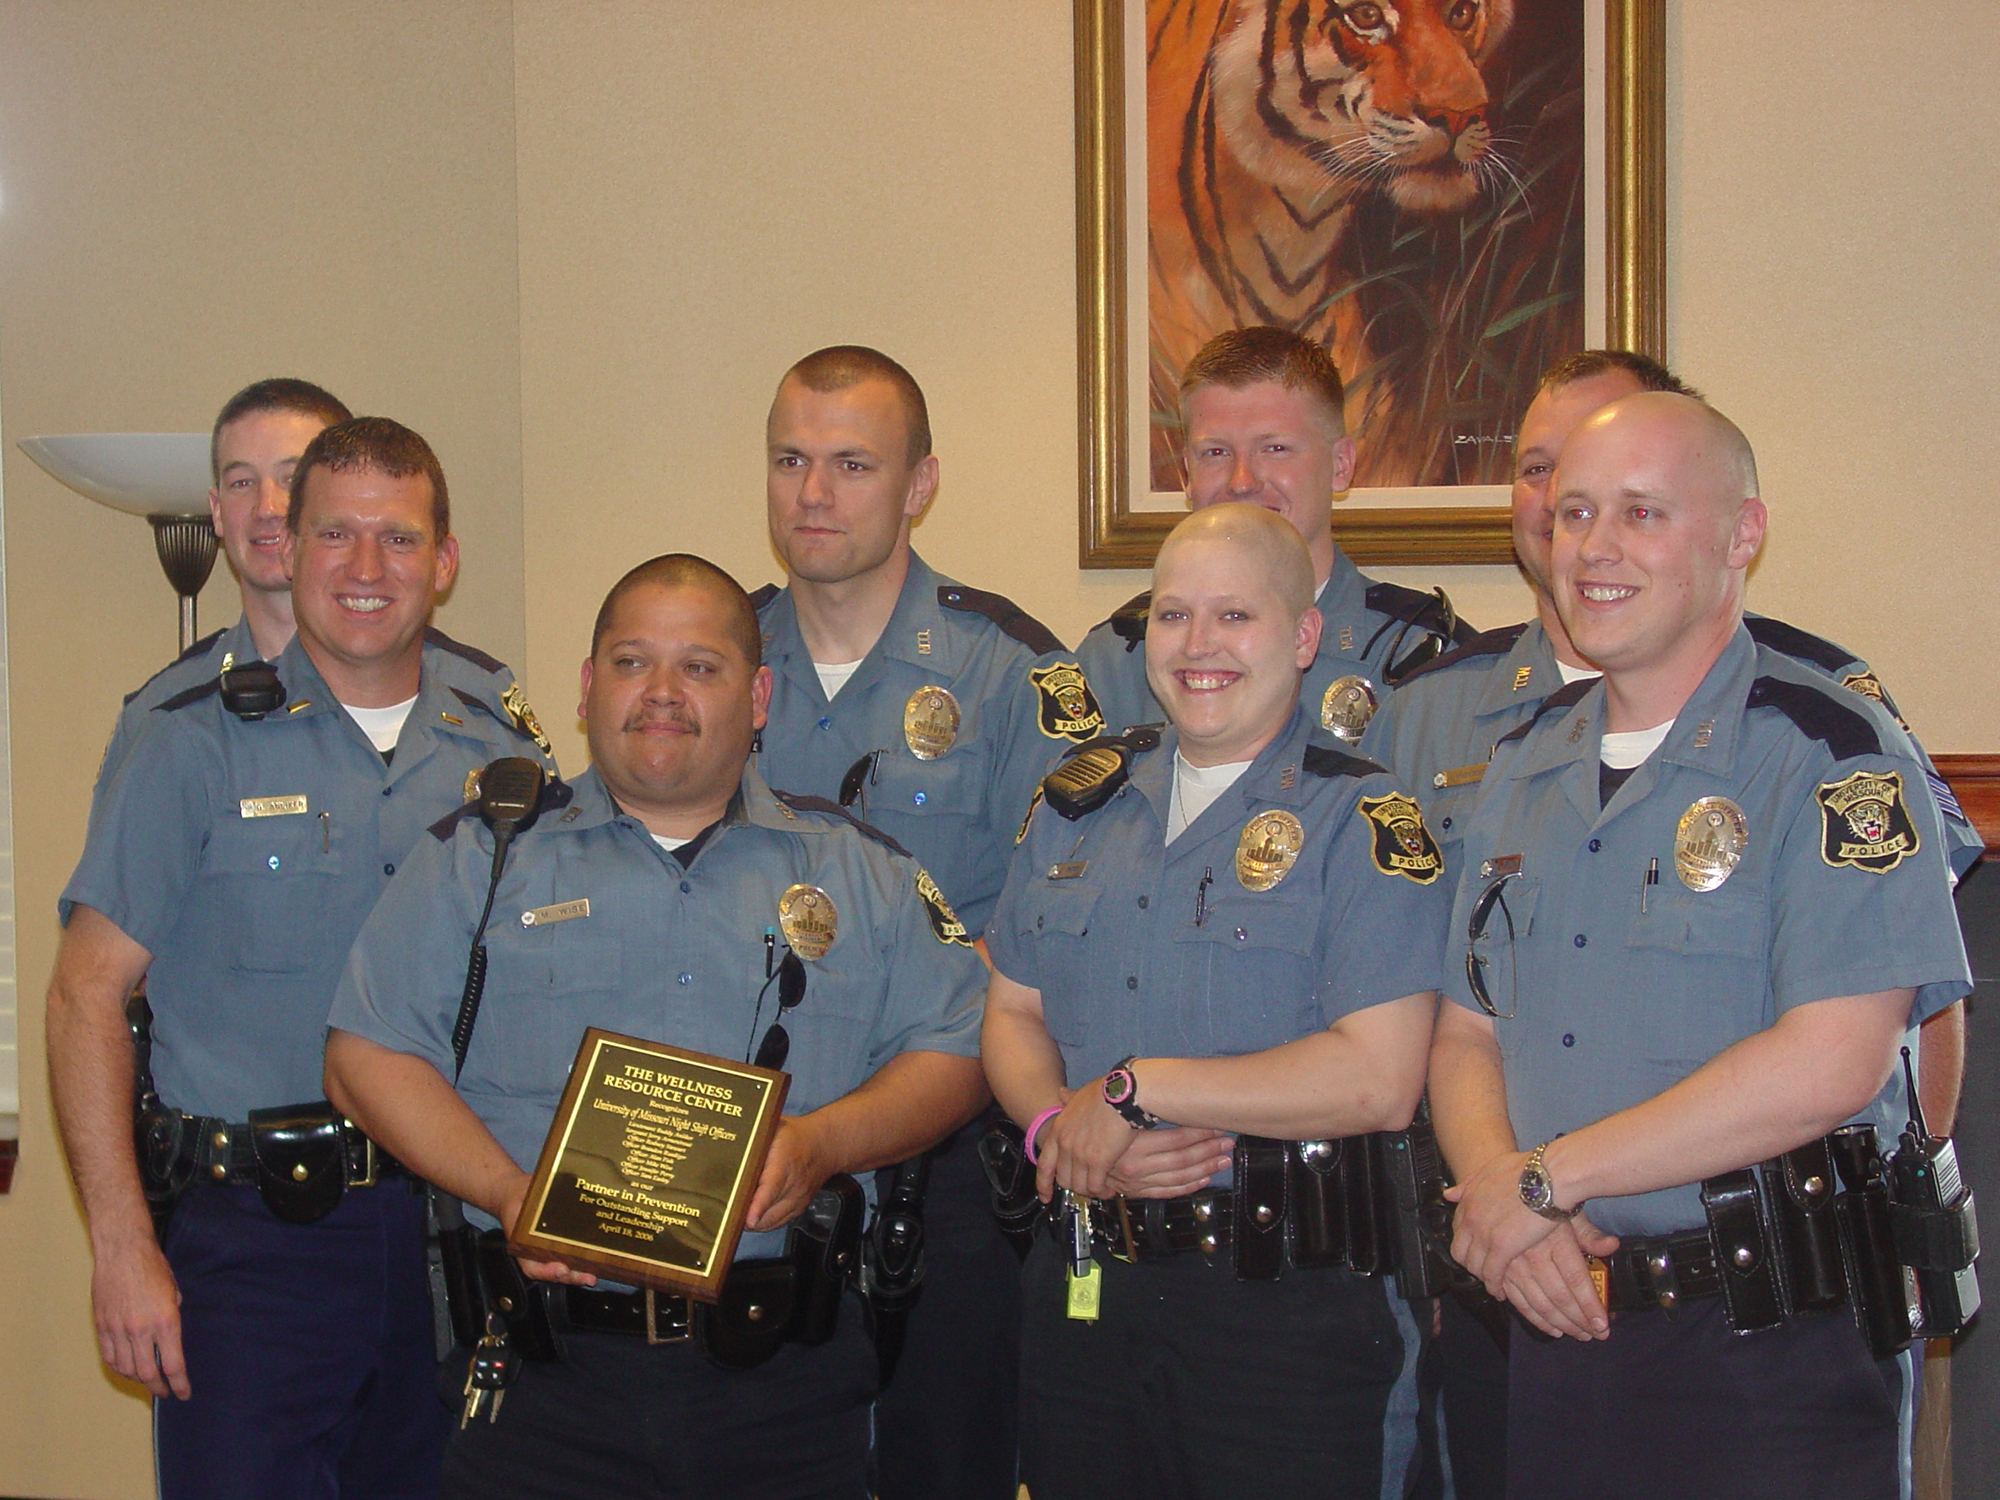 jennifer perry and fellow MUPD officers pose for a photo. perry is bald due to chemotherapy